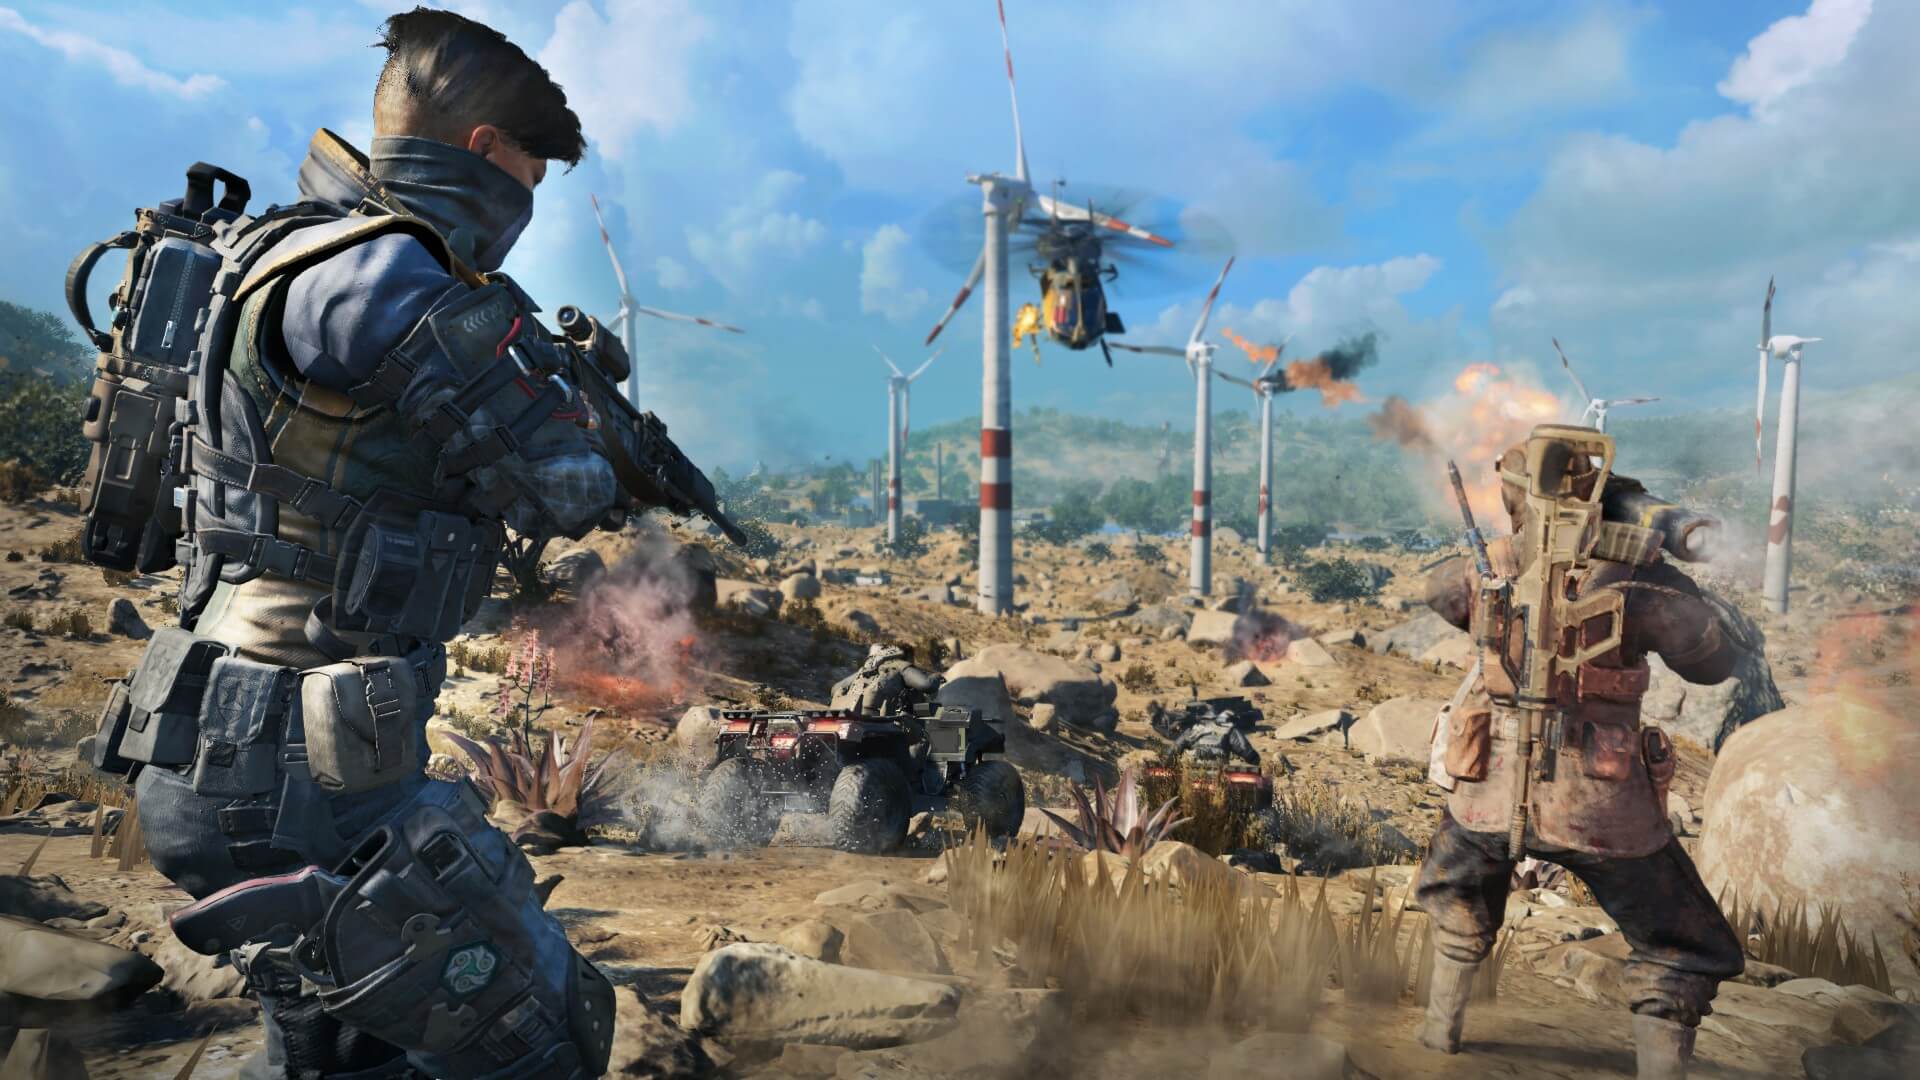 Black Ops 4 emotes let players peak around corners, but a fix is on its way